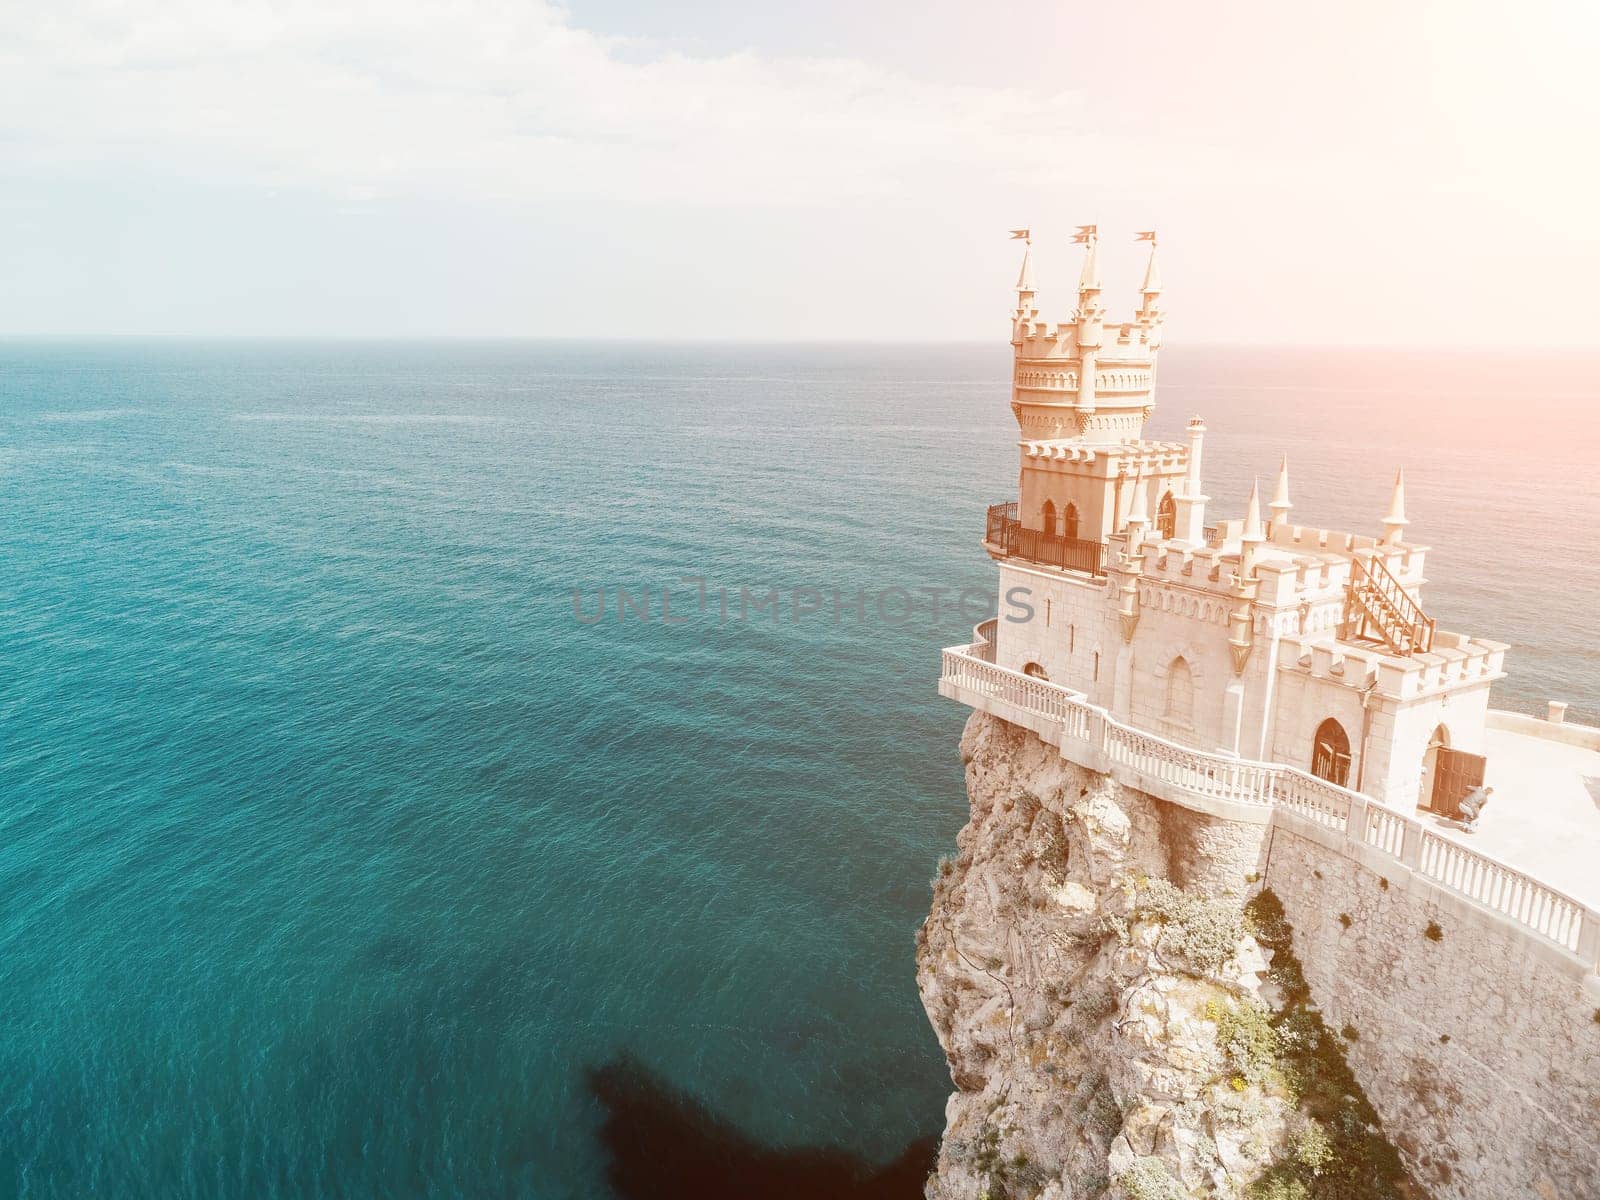 Aerial view of Swallow's Nest castle on the rock in Black Sea. It is a symbol and landmark of Crimea. Beautiful scenic panorama of the Crimea coast. Amazing Swallow's Nest at the precipice.